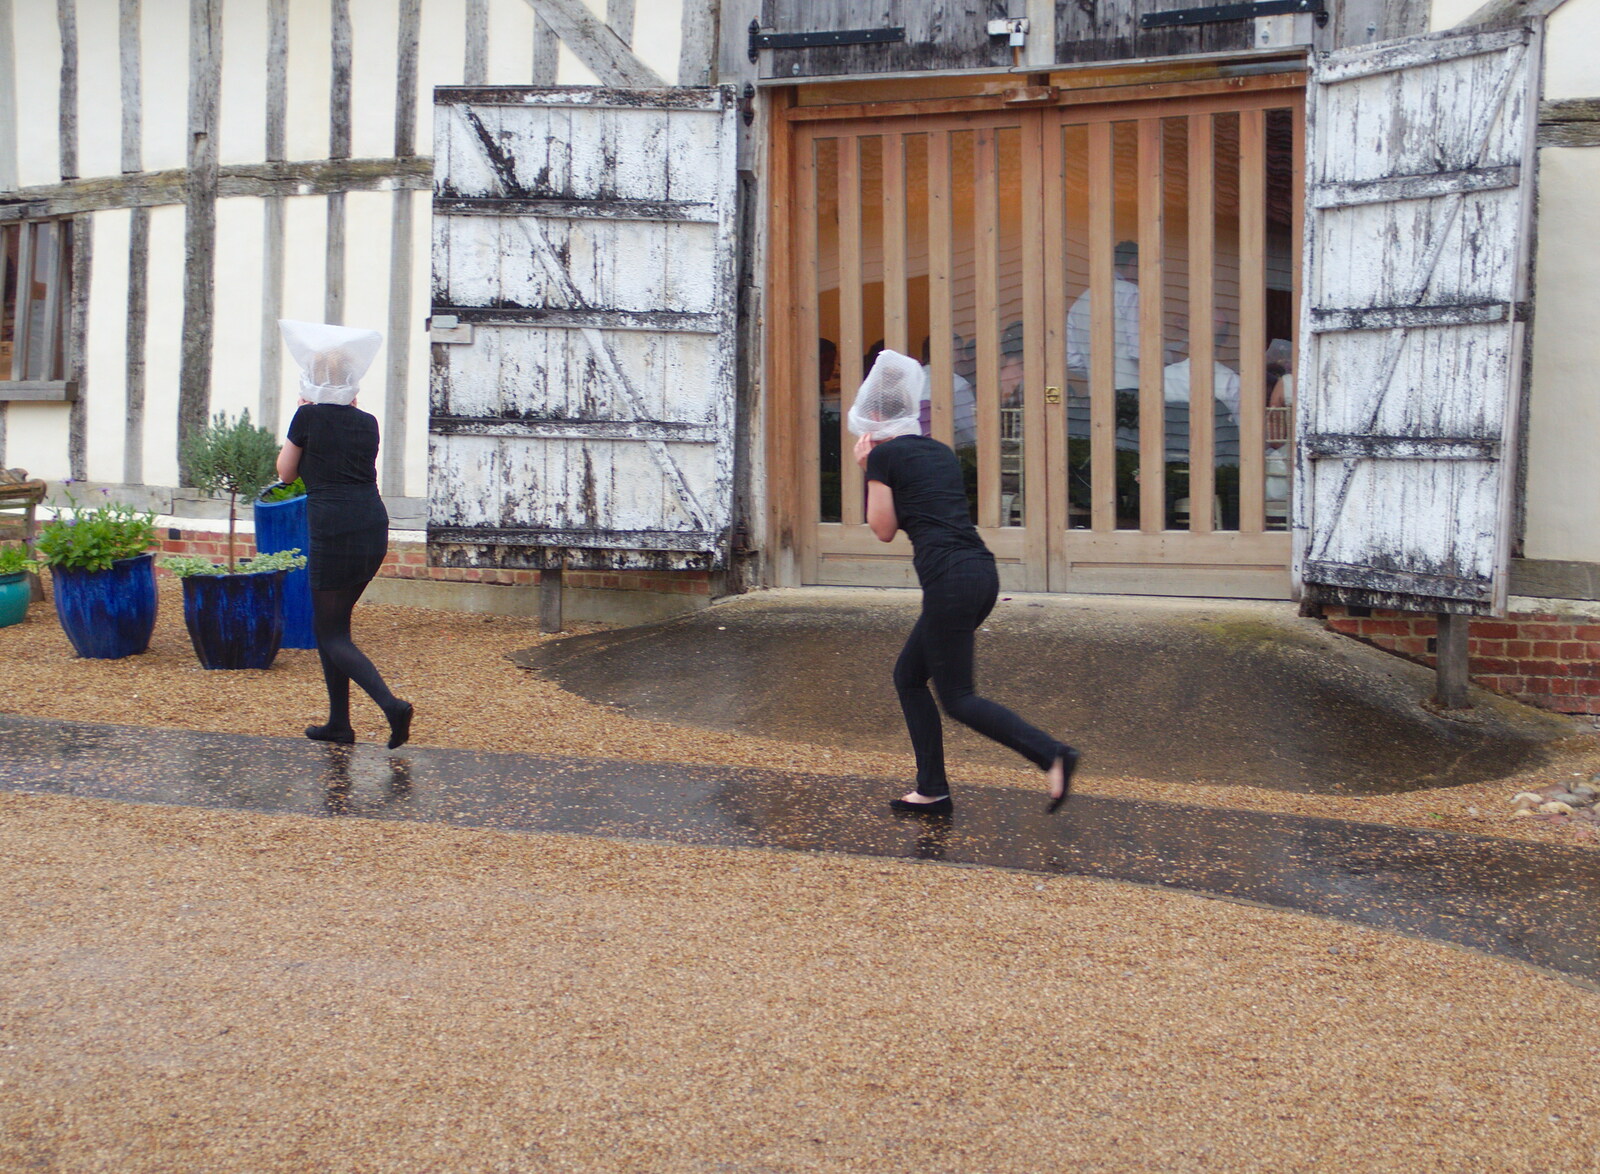 Outside, some waitresses leg it in the rain from The BBs Play Scrabble at Wingfield Barns, Wingfield, Suffolk - 24th May 2014